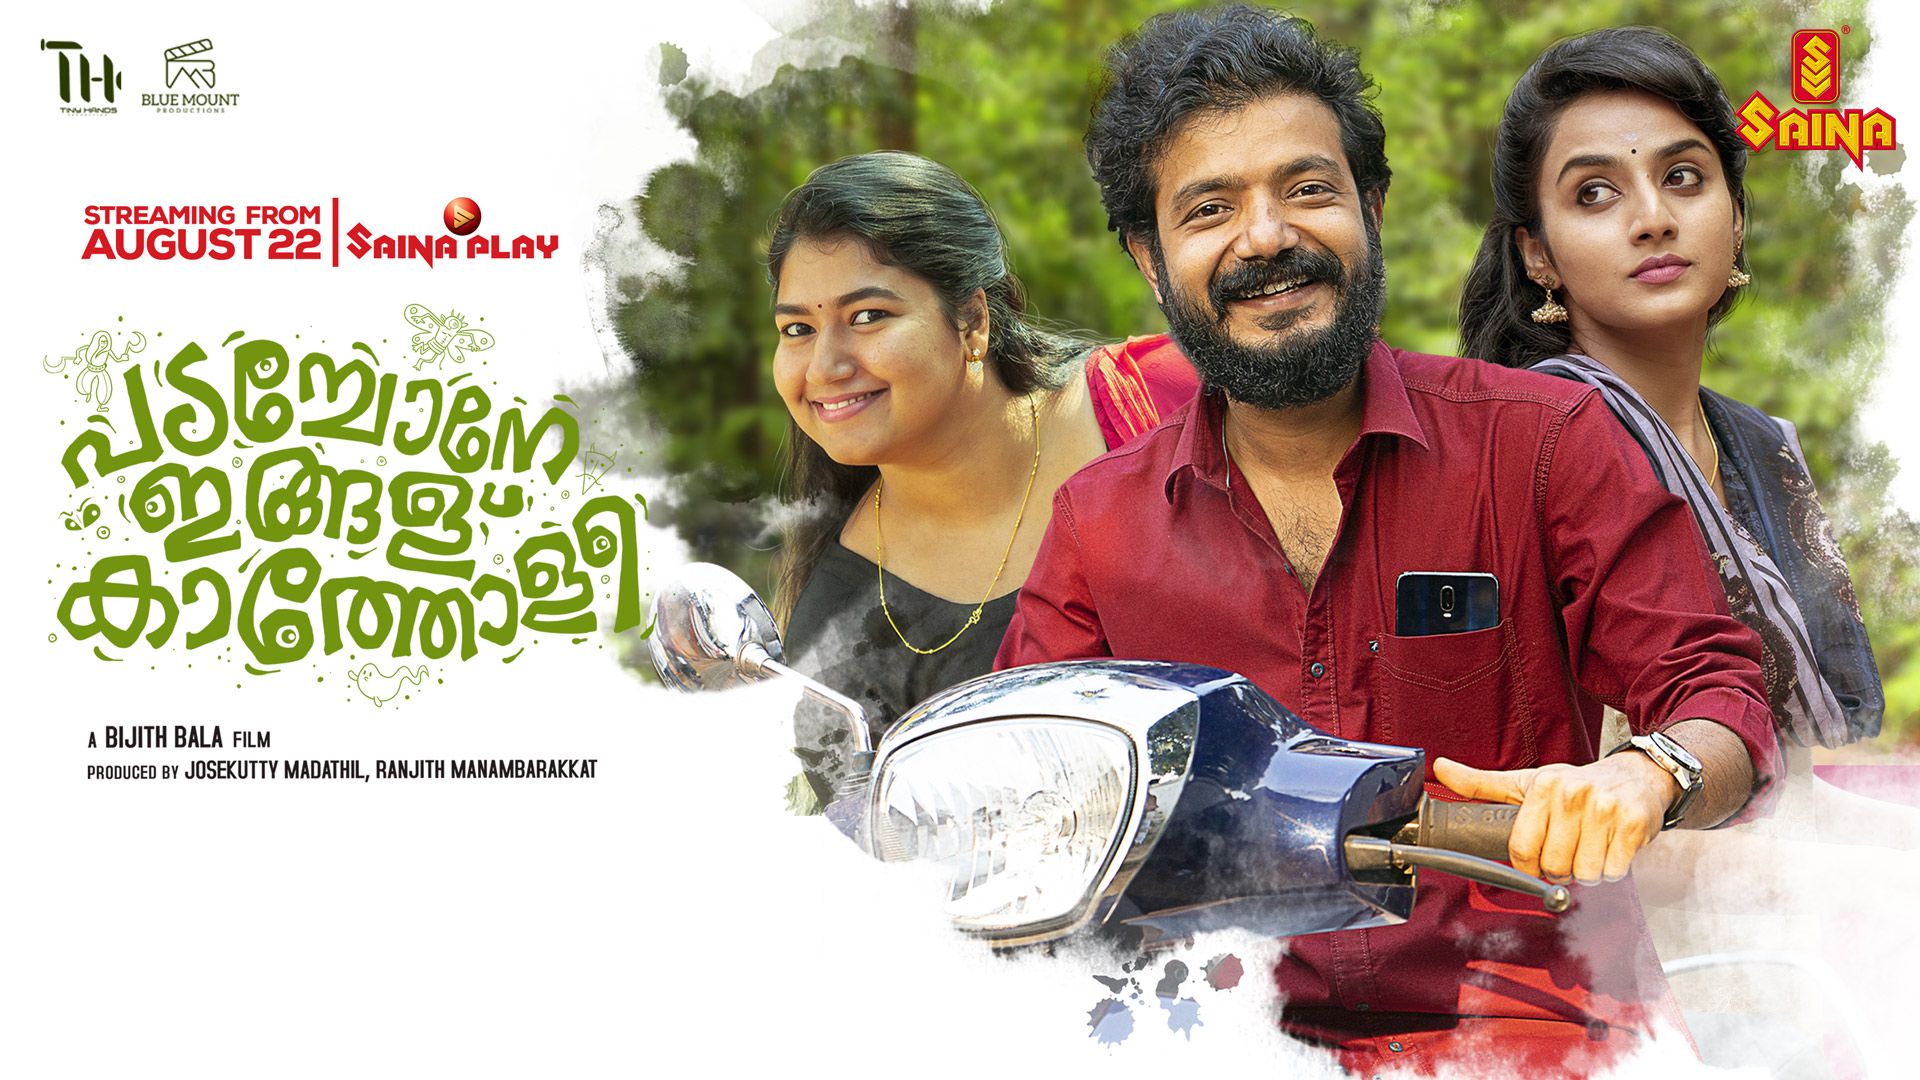 Onam 2015 Ratings Of Malayalam General Entertainment Channels - Asianet Leads 3